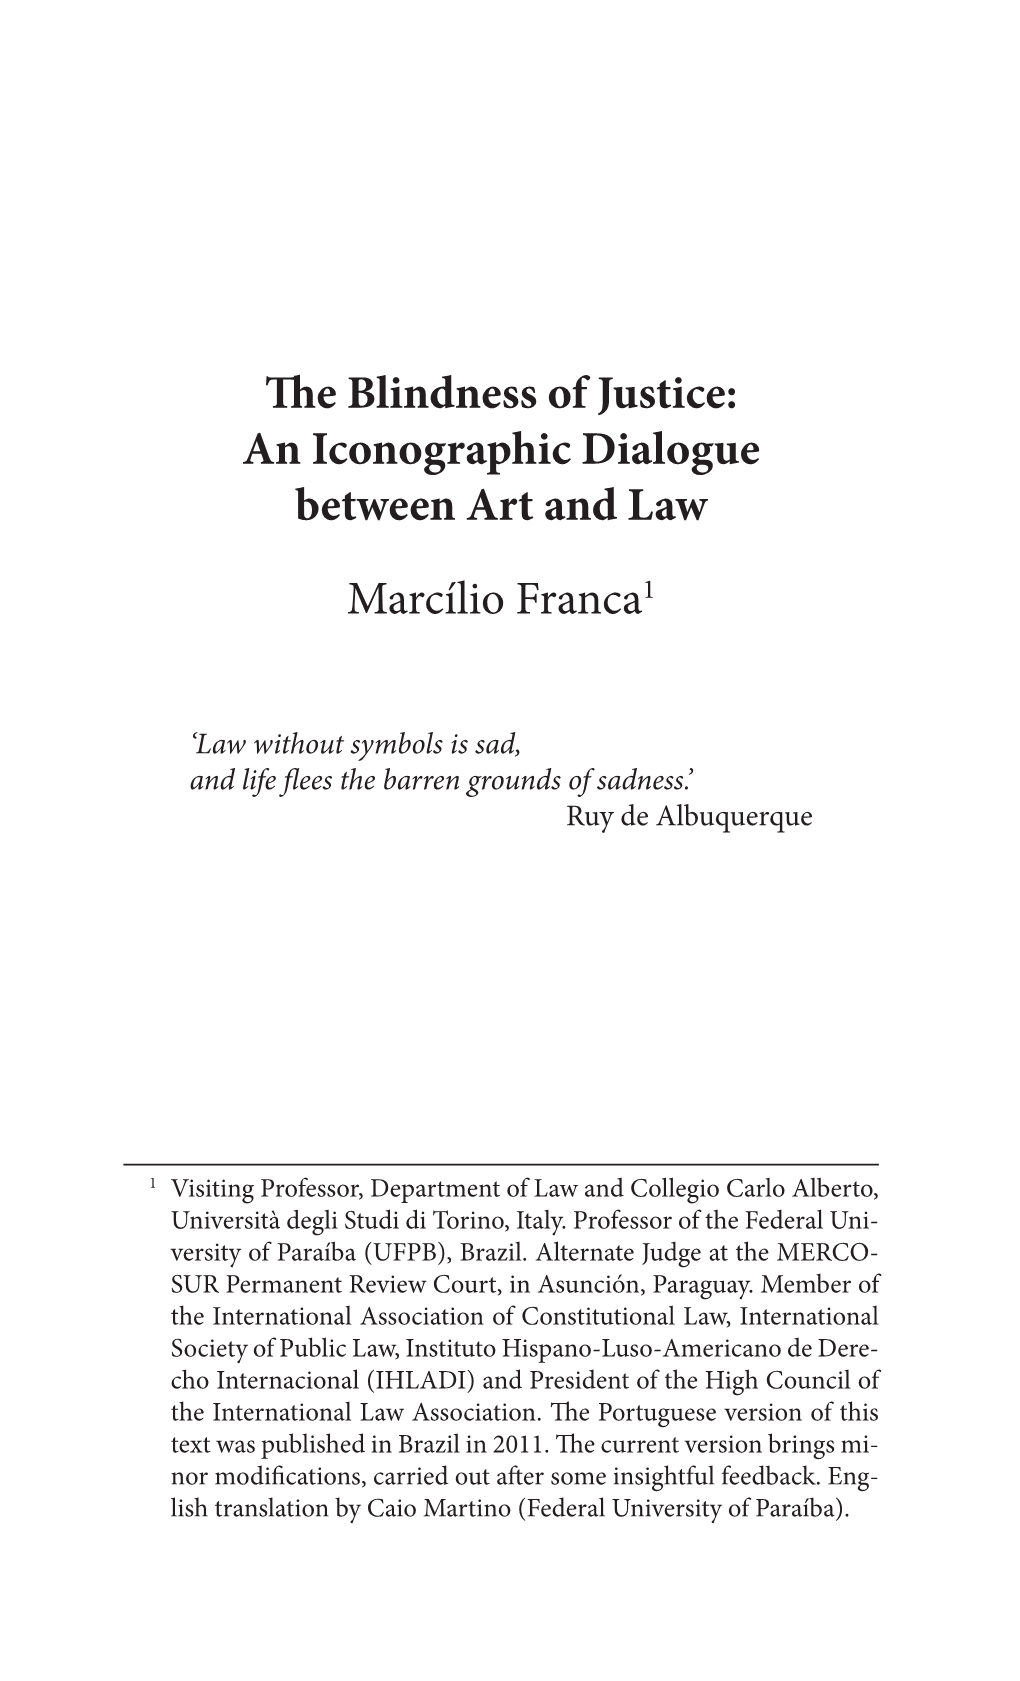 The Blindness of Justice : an Iconographic Dialogue Between Art